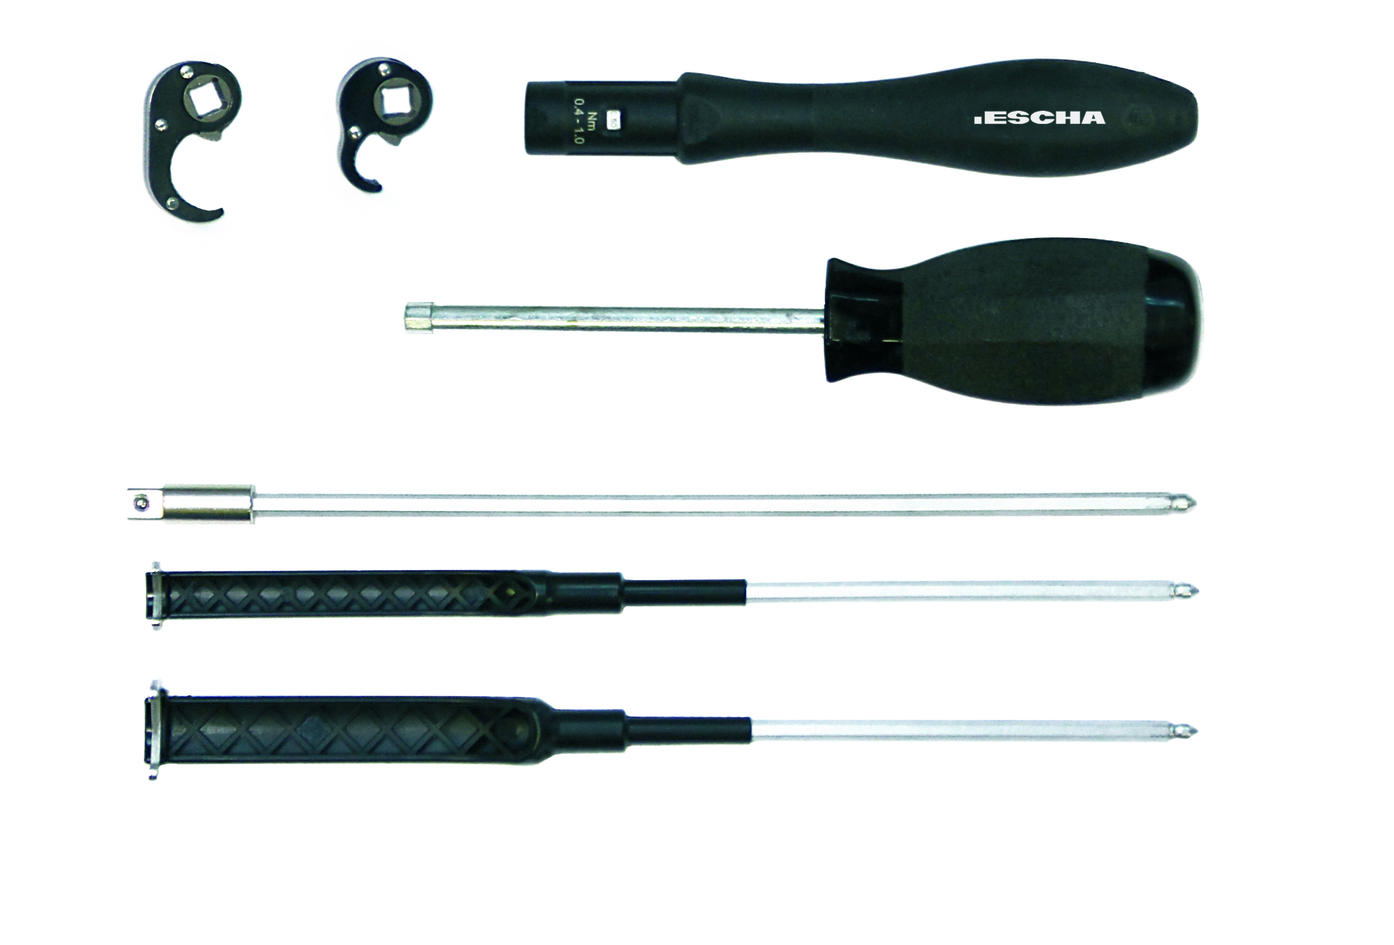 Torque-wrench set, QTY 1